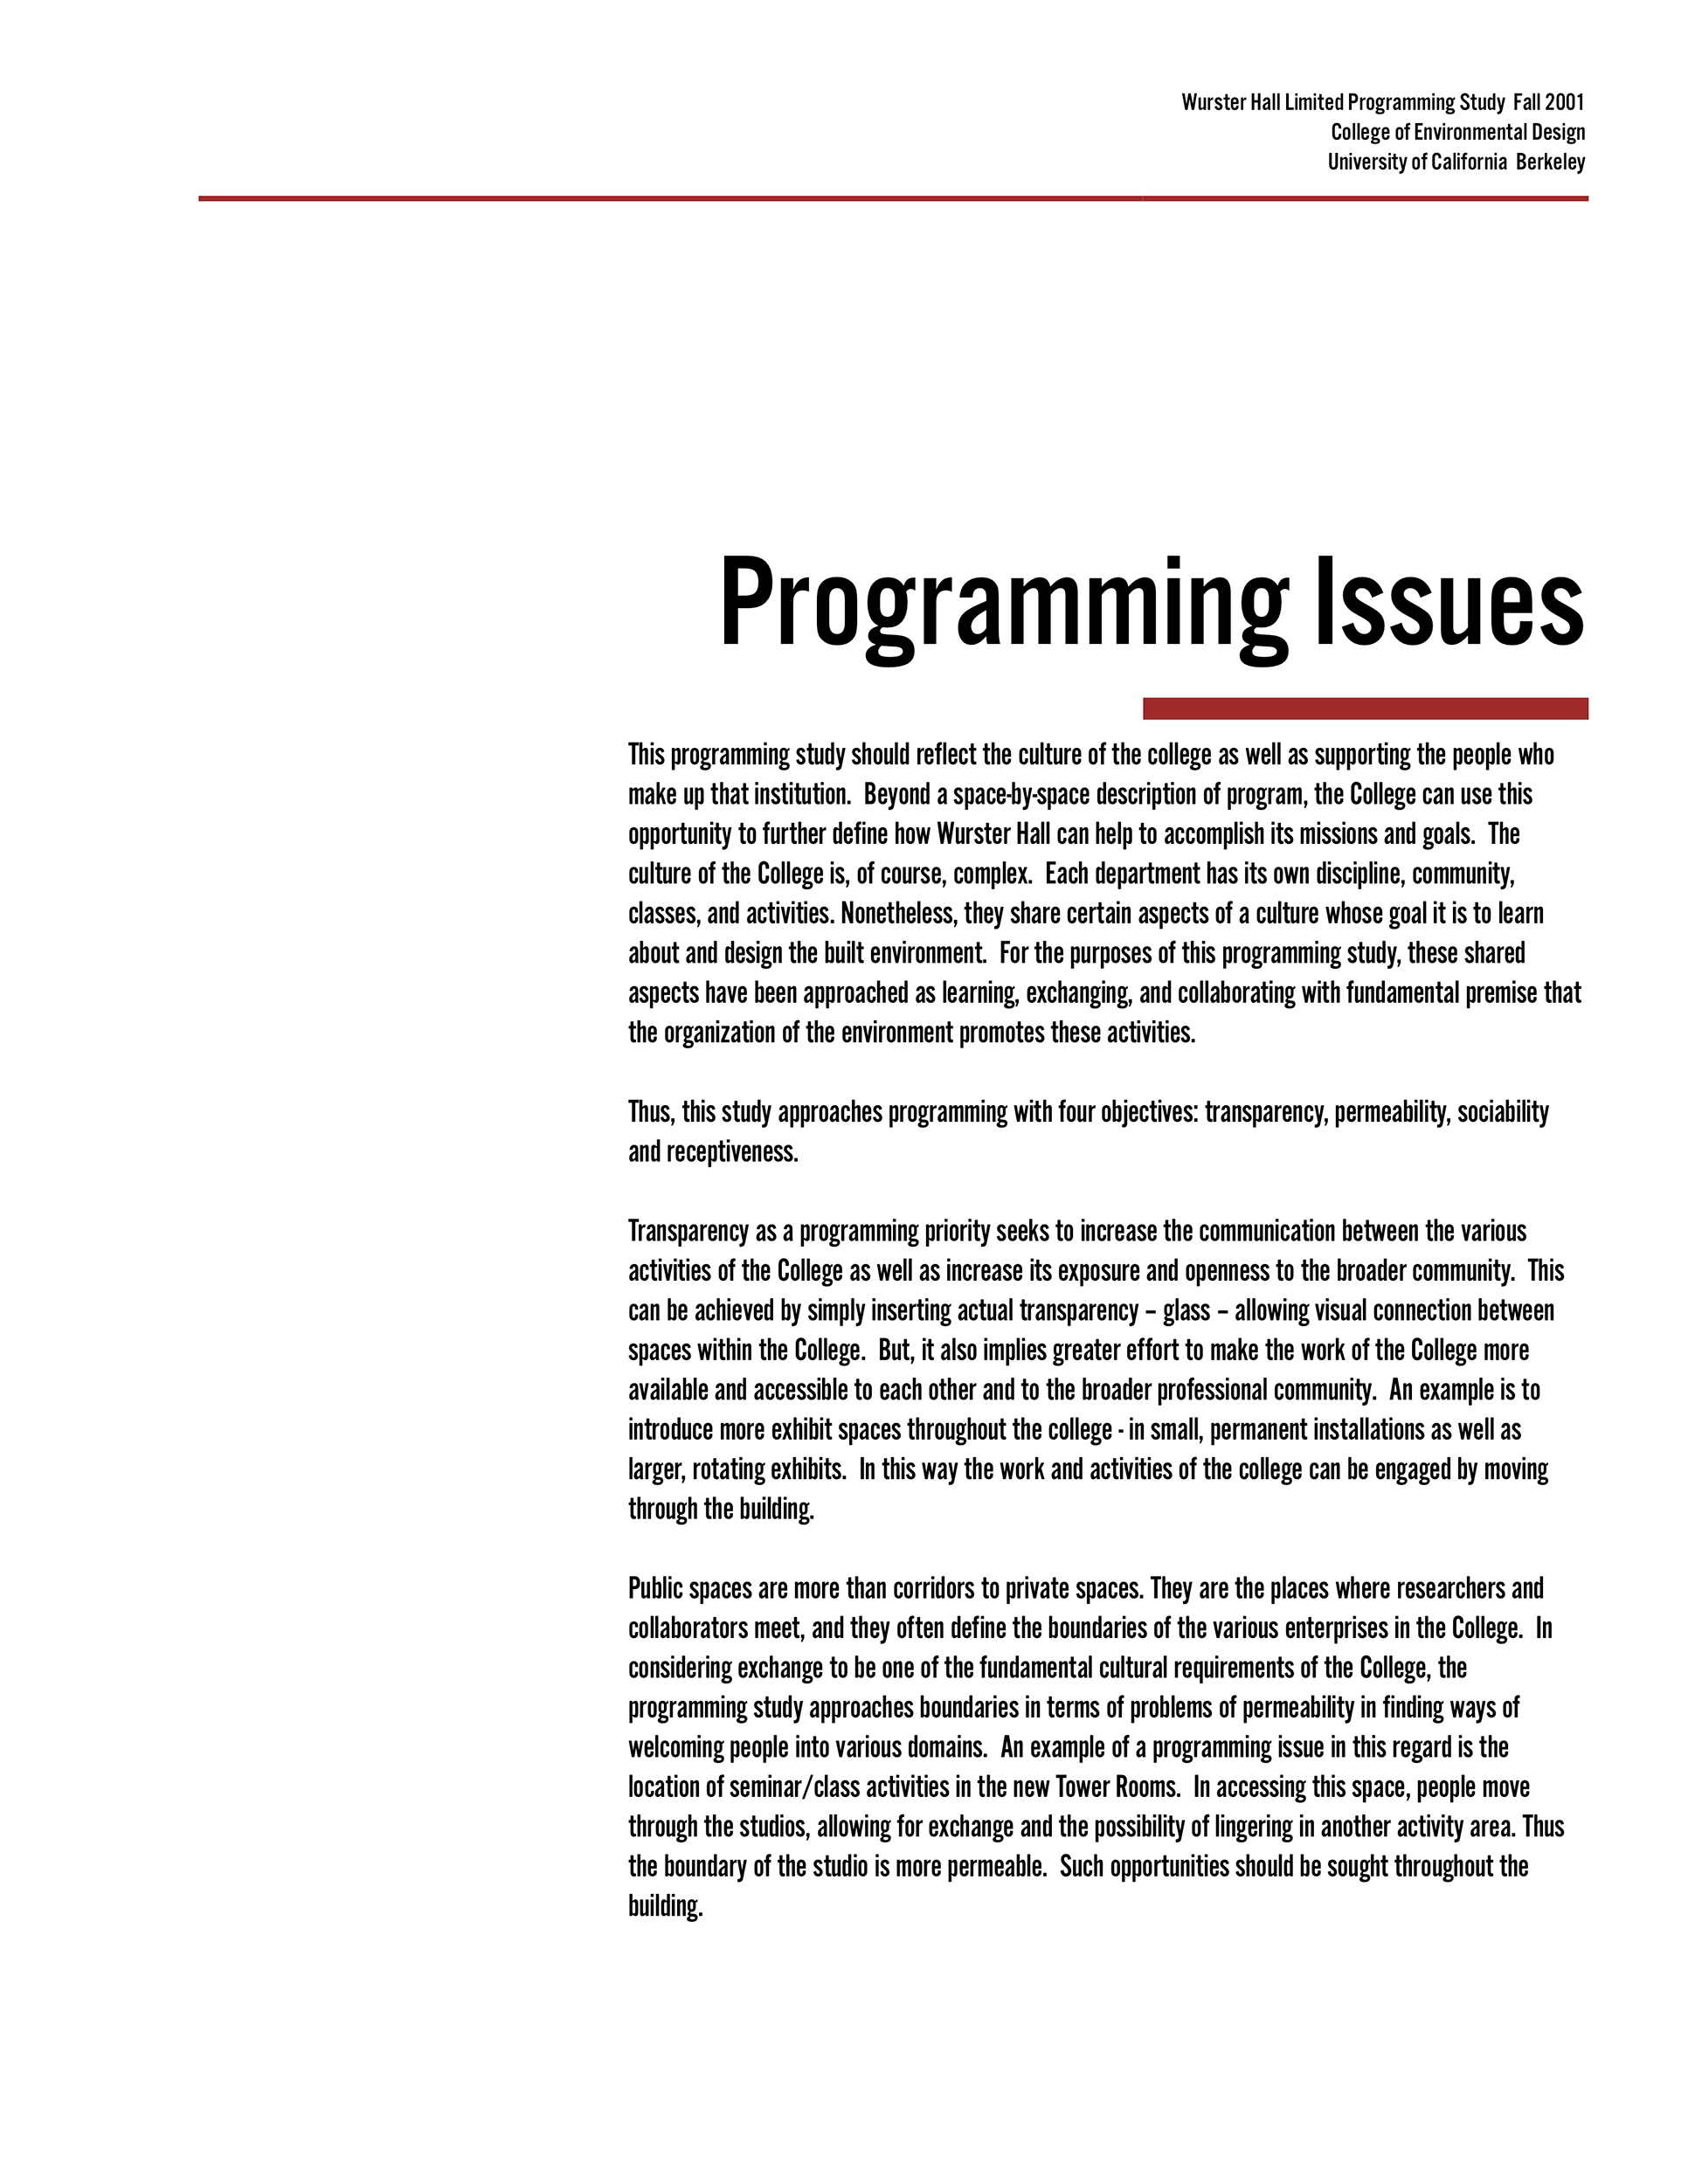 Programming-Issues-(dragged).gif